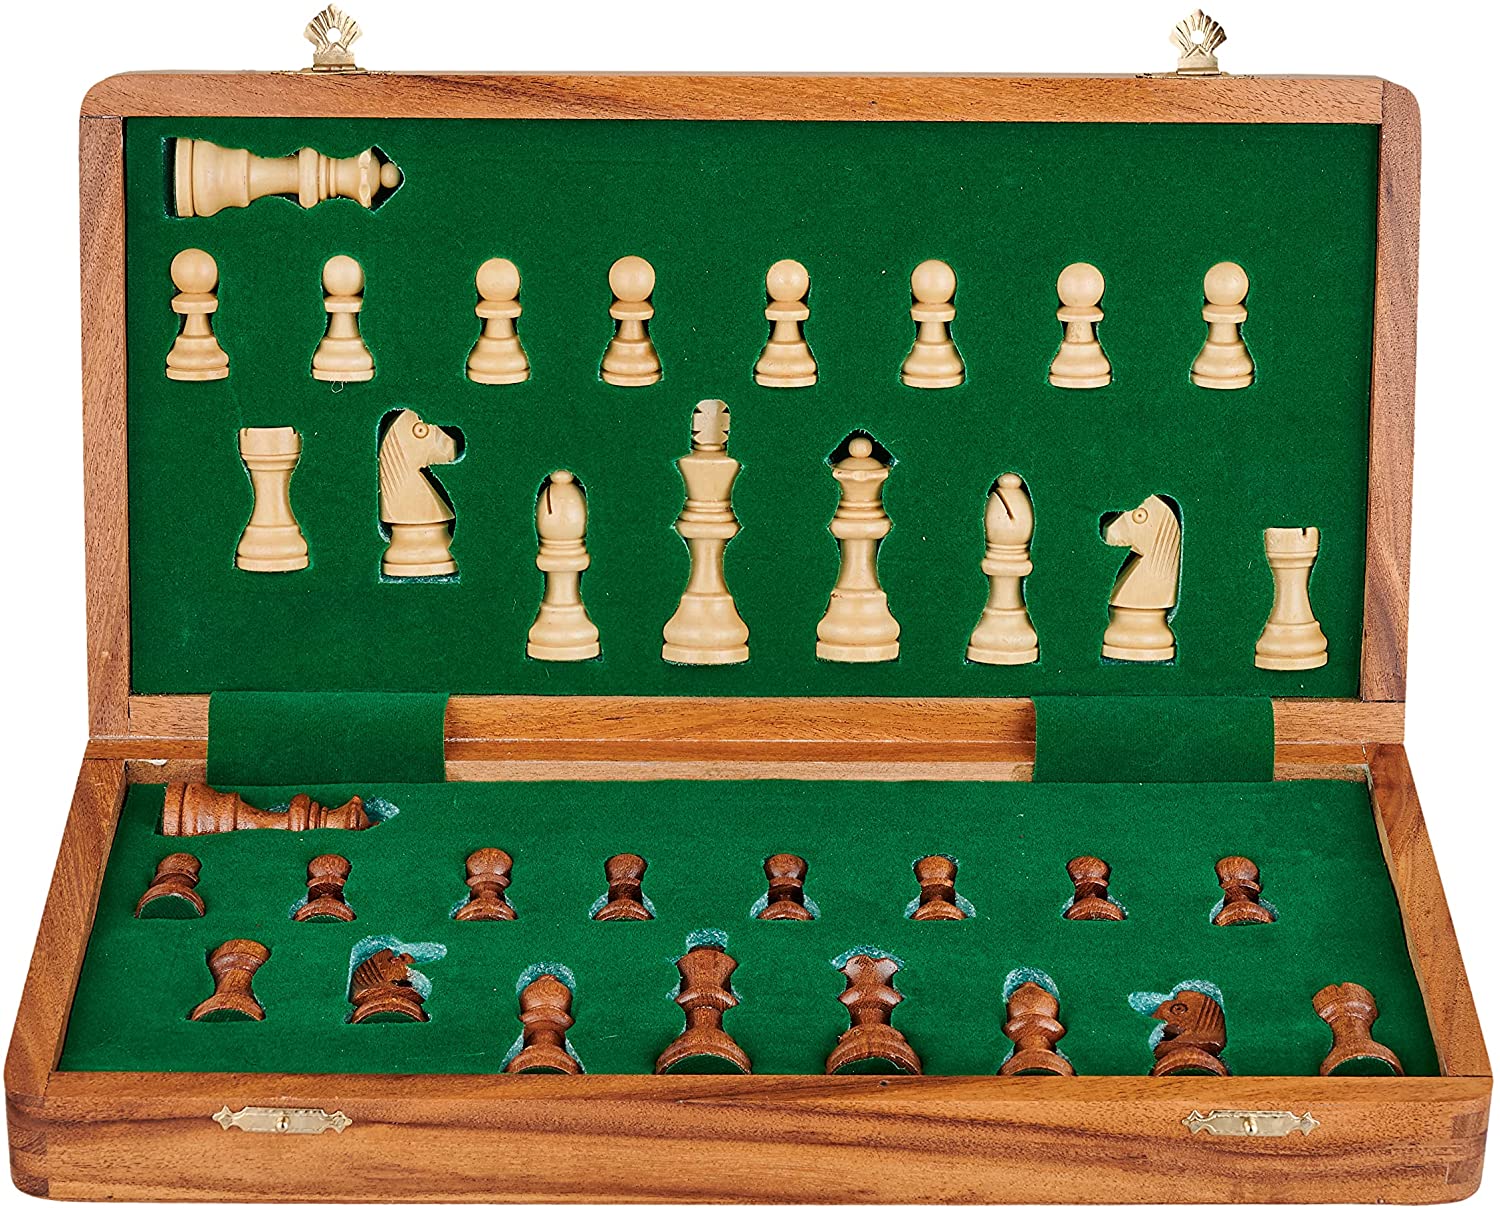 14 Inch Large Wood Magnetic Chess Set with Storage - Folding Wooden Travel Chess Board Game with Chessmen Storage - Handmade Tournament Chess Set - Best Strategy Educational Toy for Adults Teens - image 2 of 9